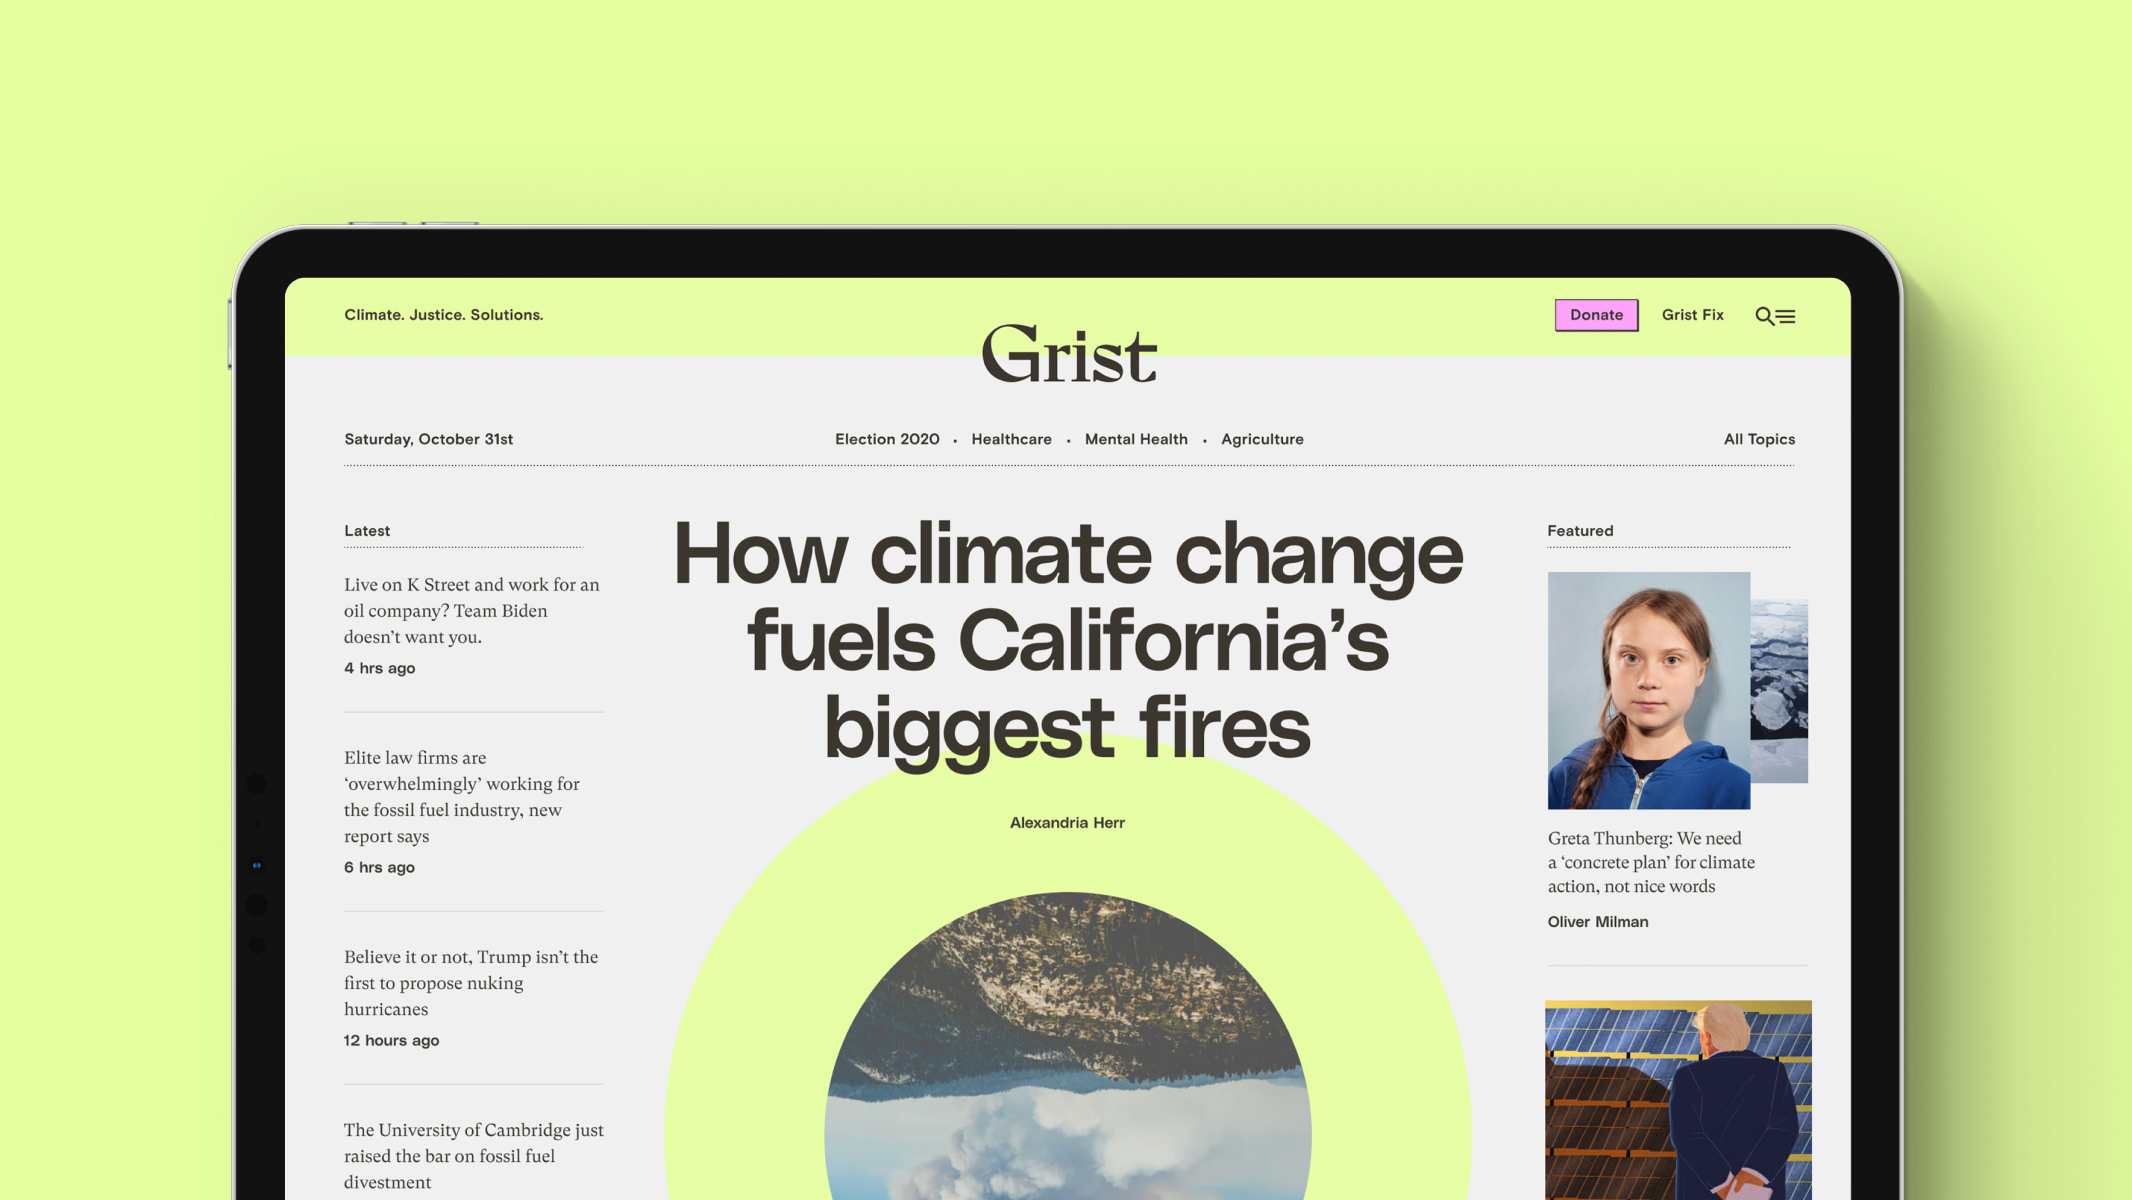 Grist 50 - Climate and justice leaders to watch, Grist